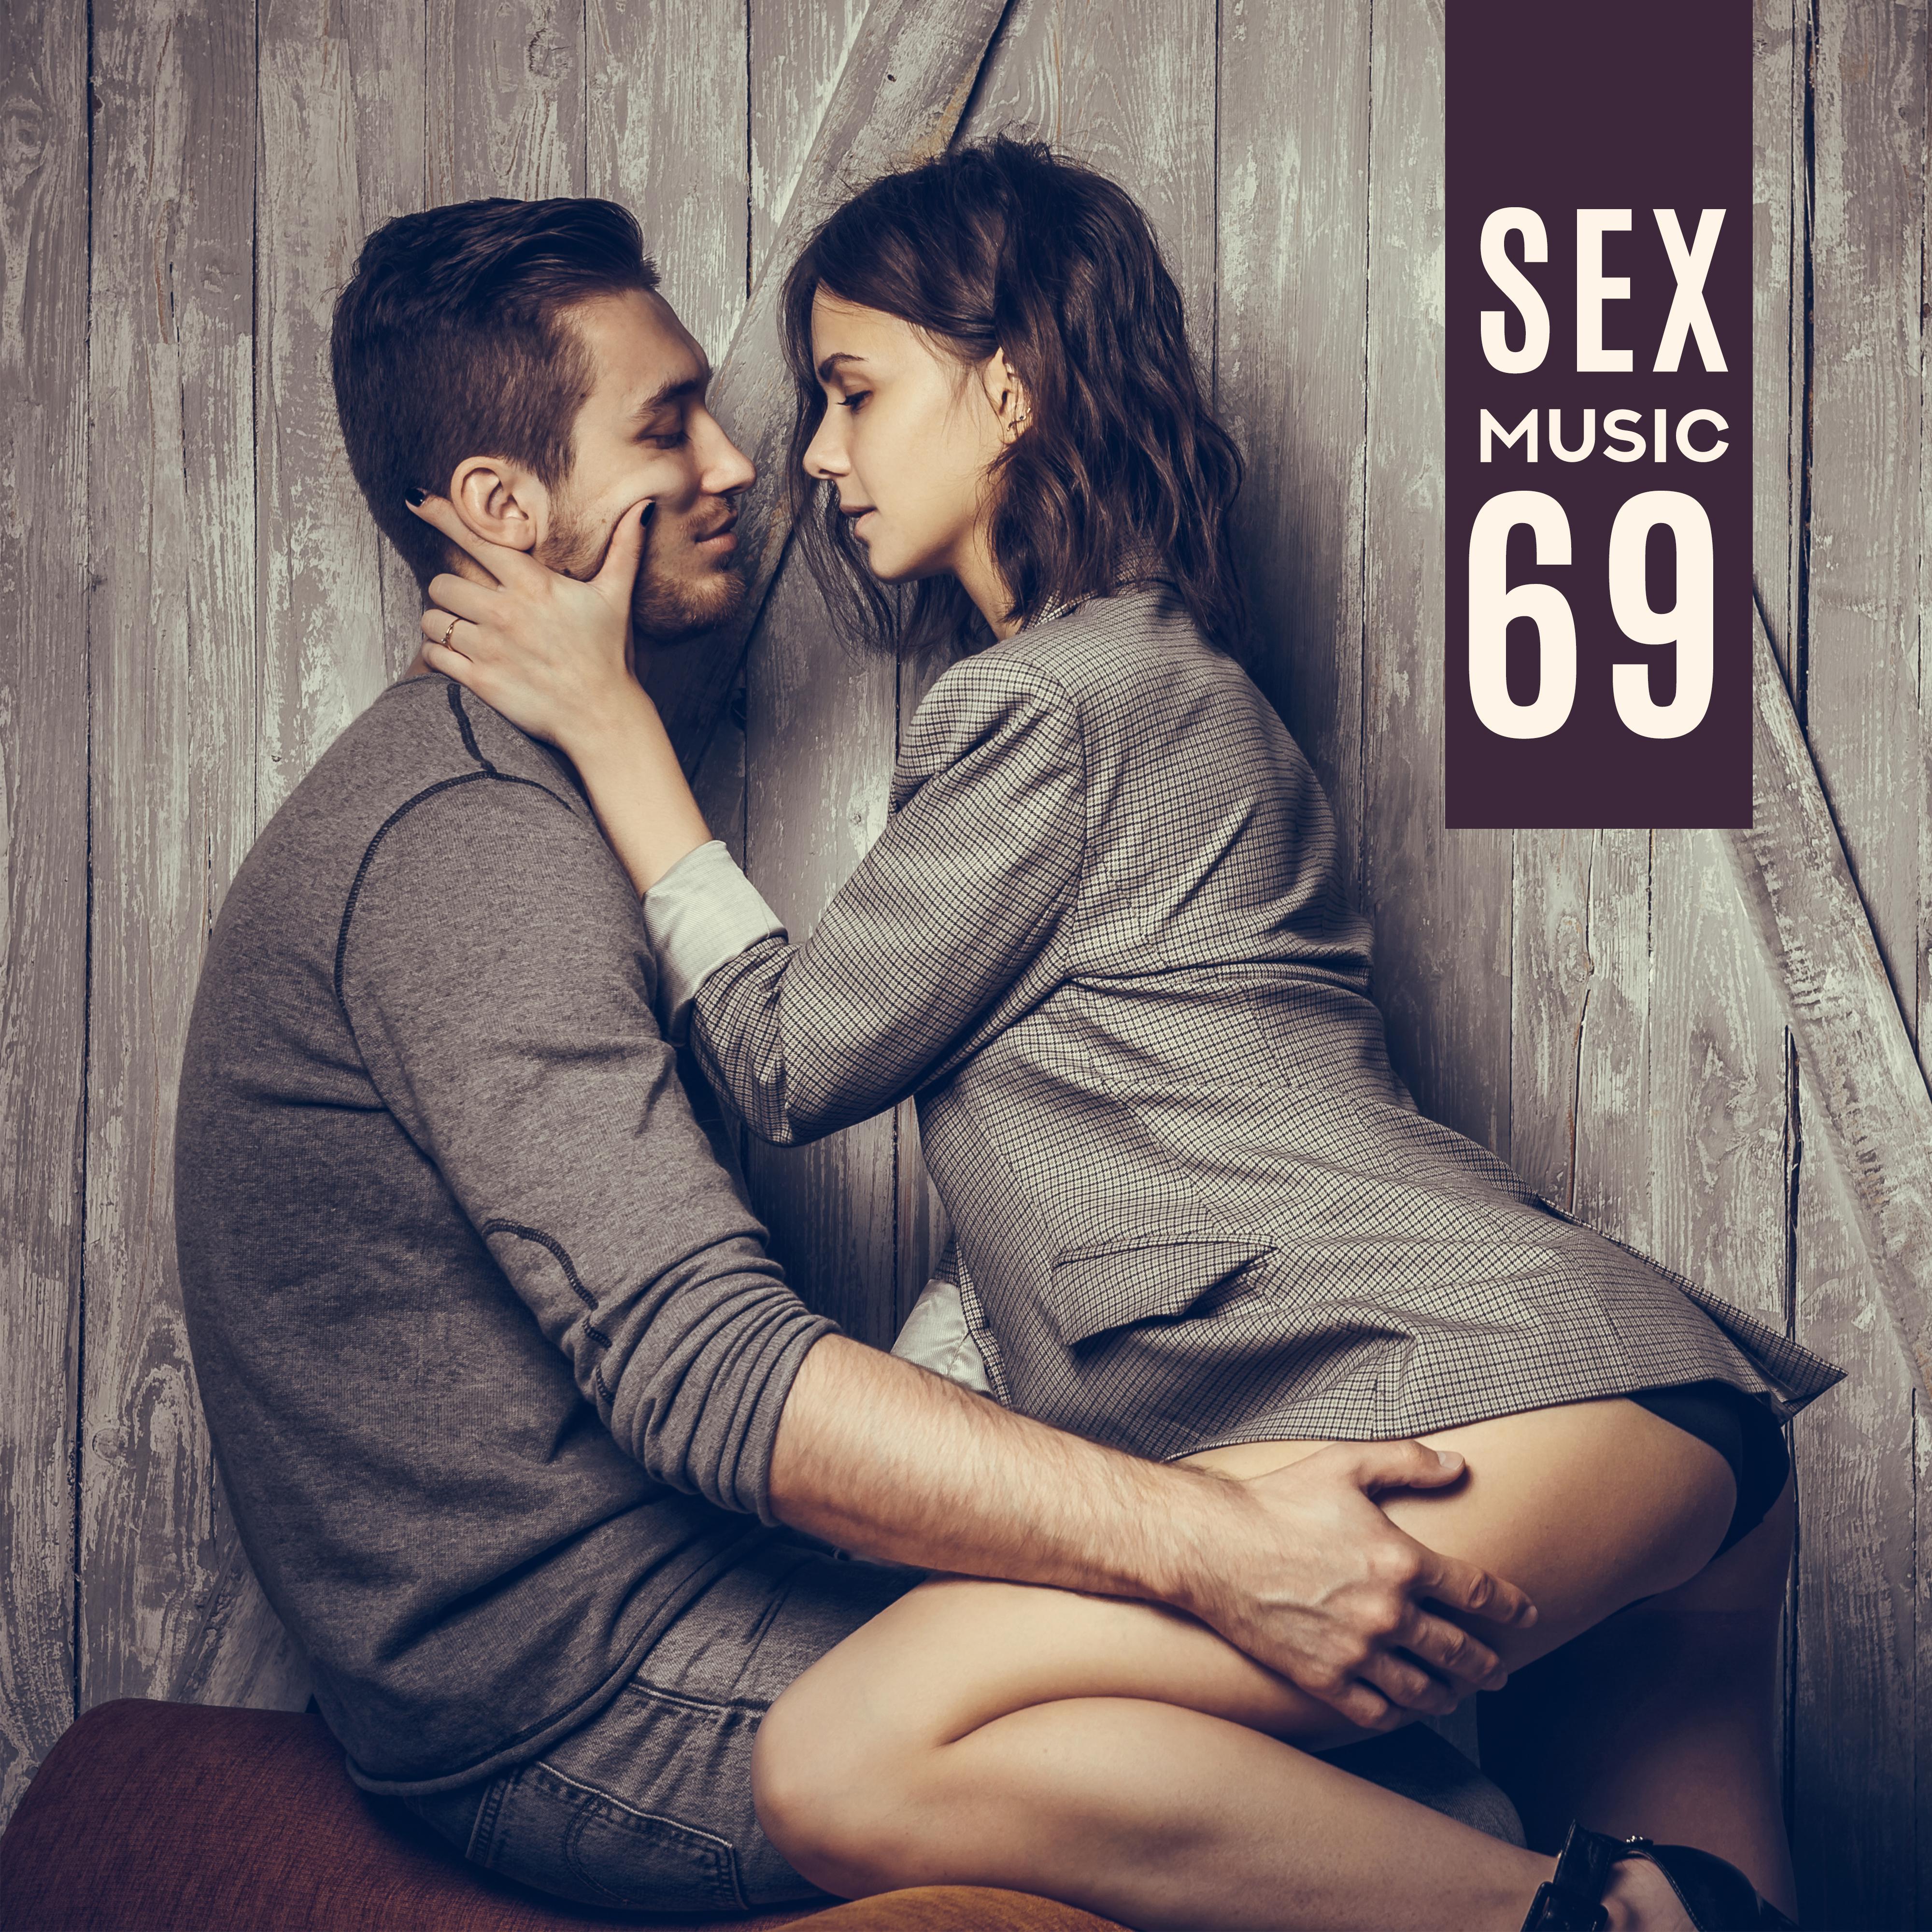 *** Music 69: Pure Relaxation, **** Jazz, Instrumental Music for Making Love, Lounge